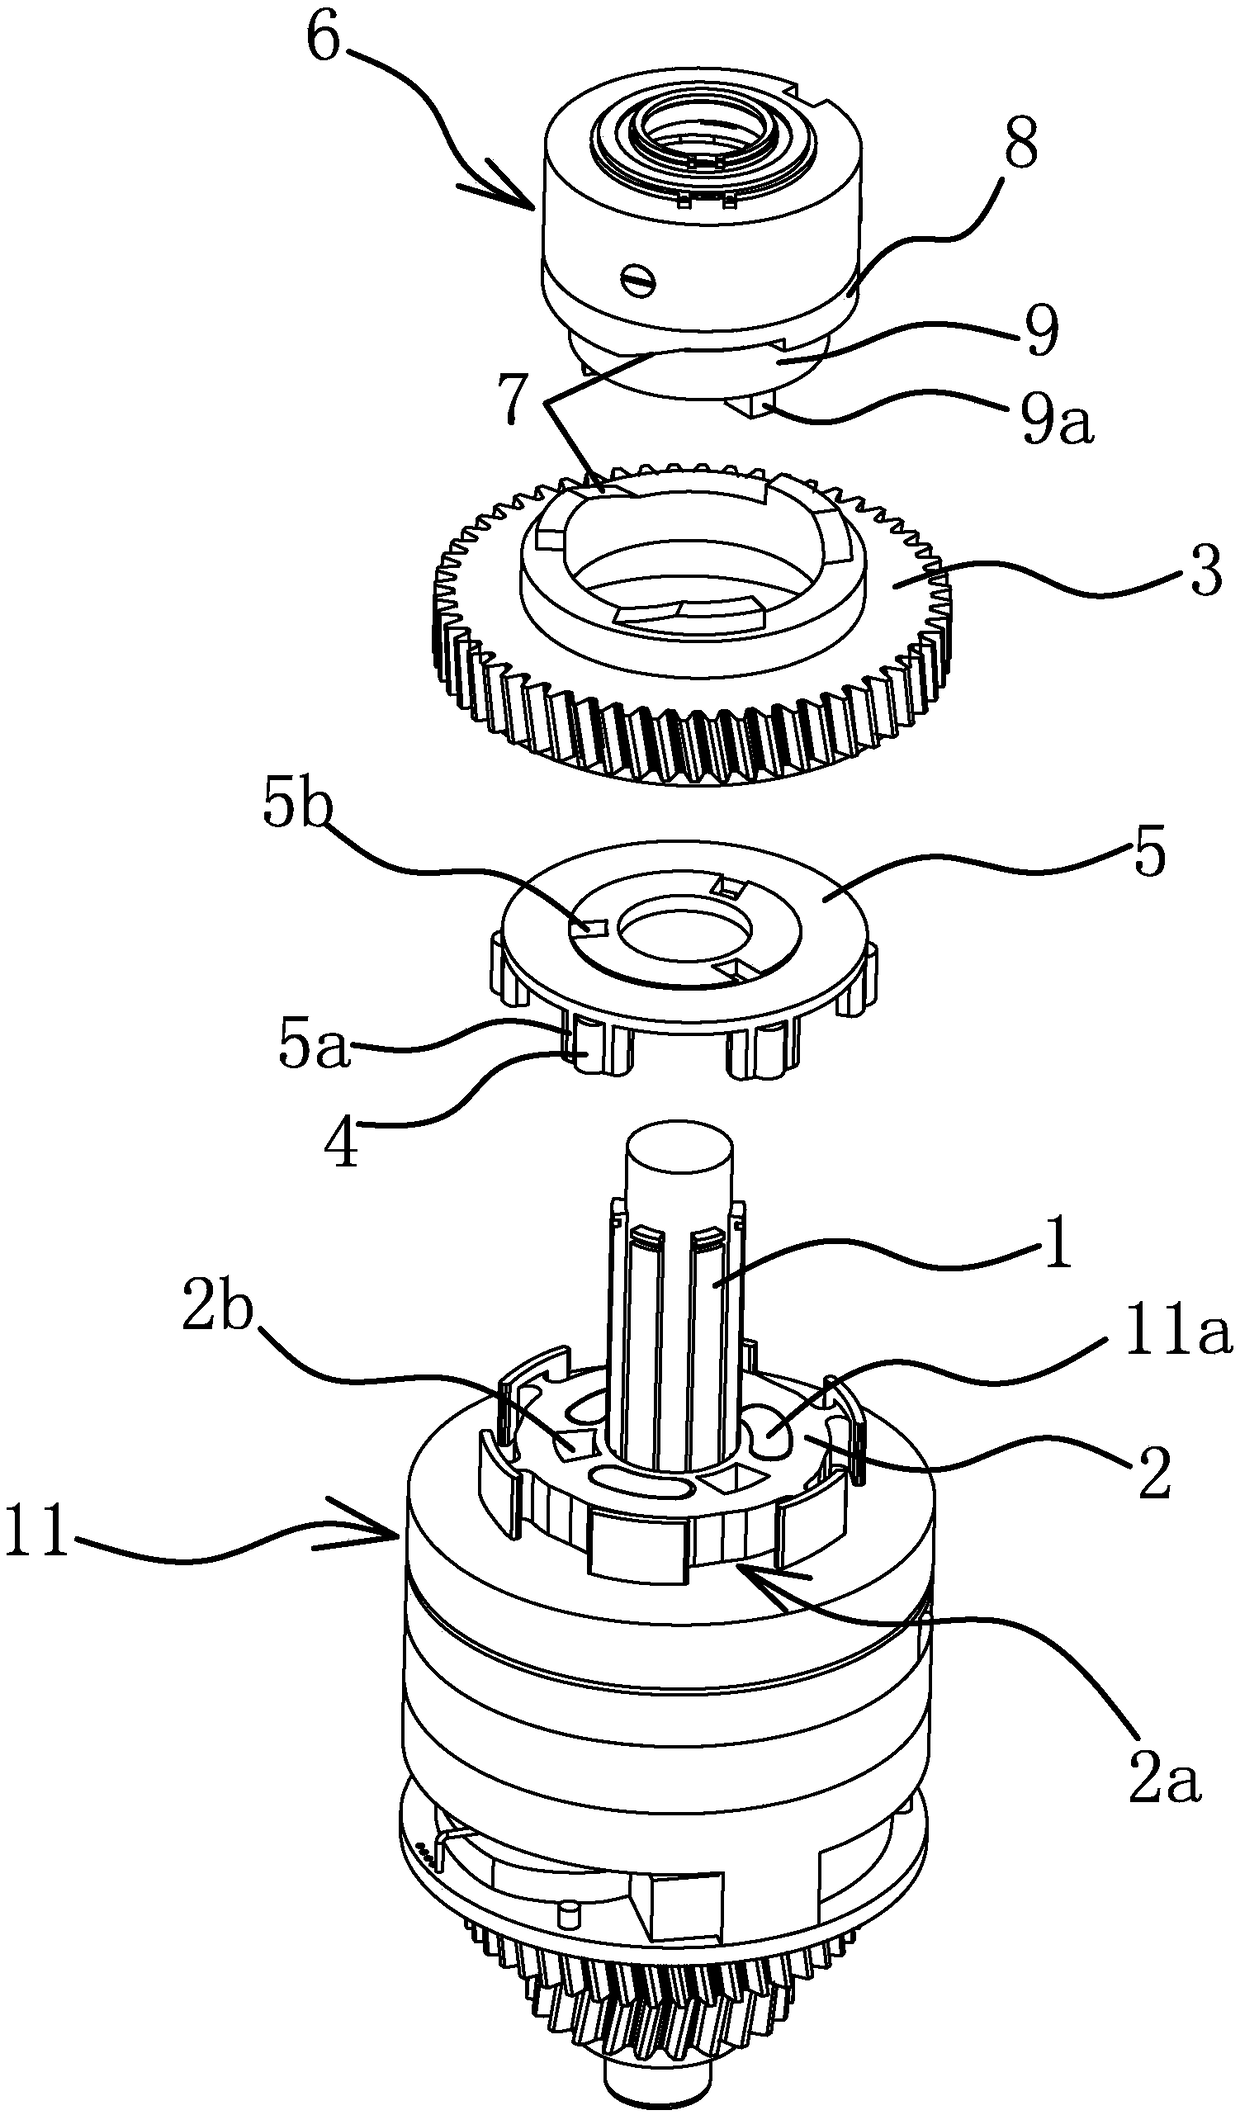 Transmission mechanism for two-direction automatic variable-speed motor